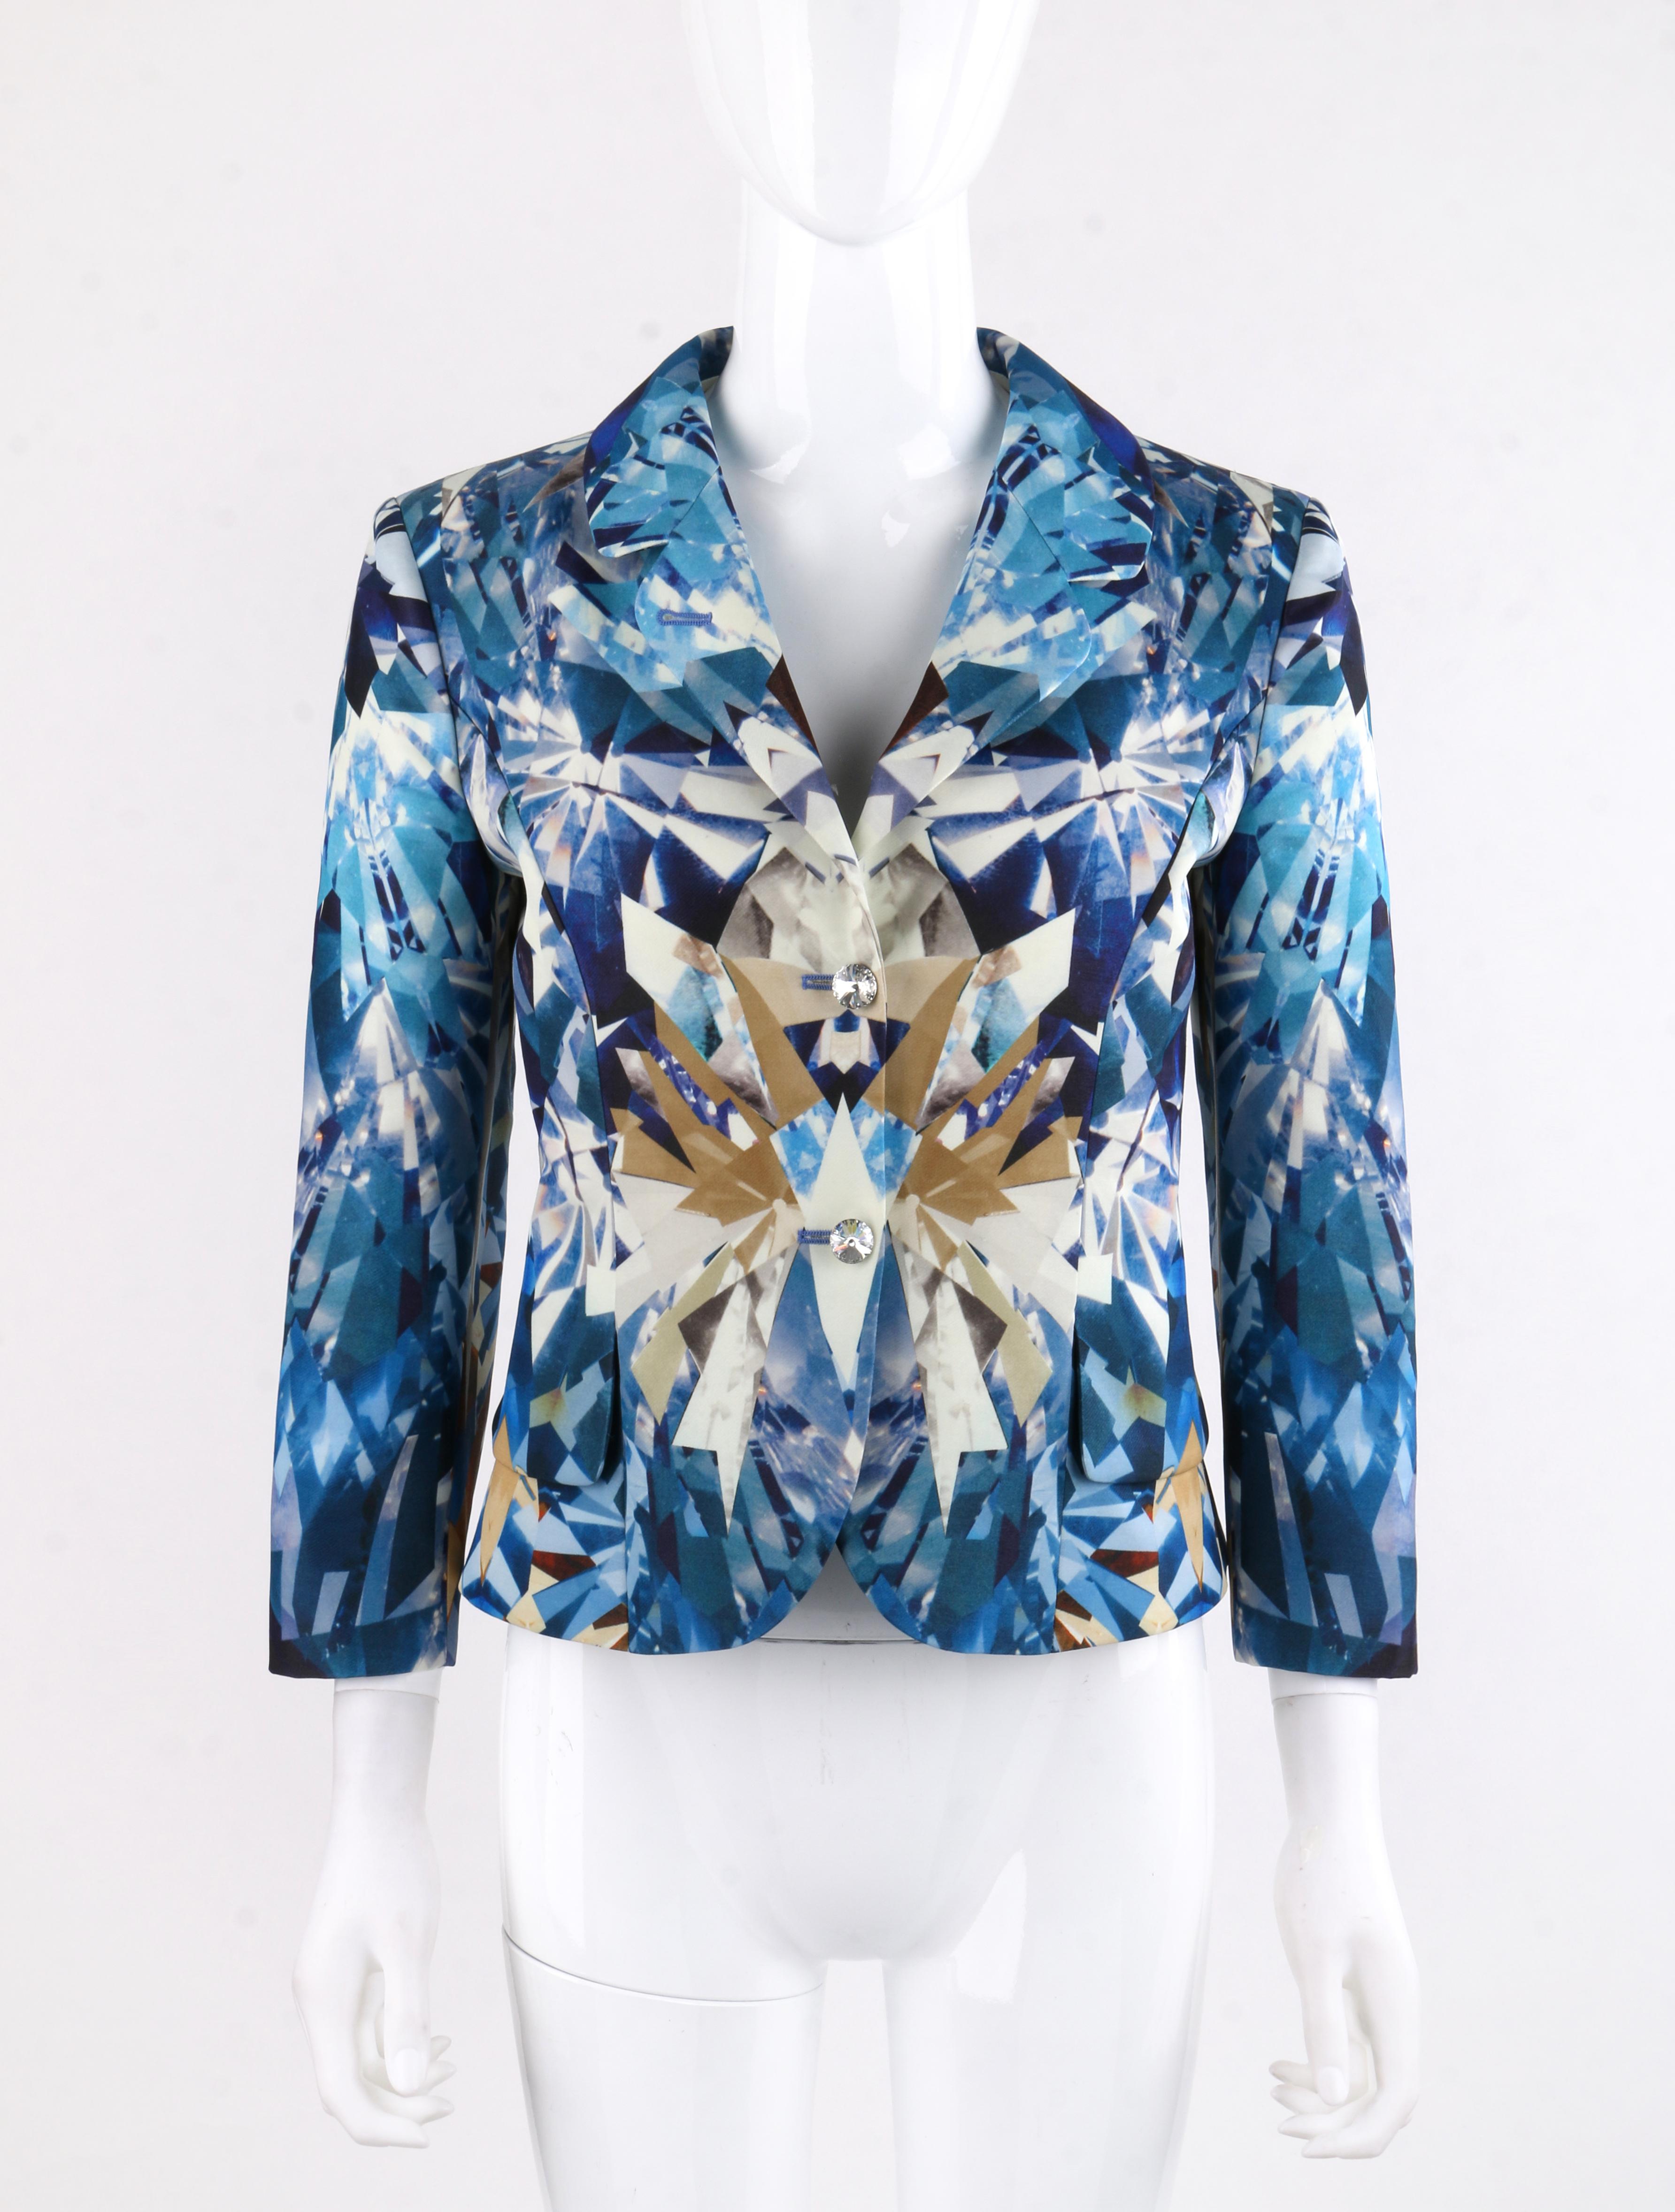 ALEXANDER McQUEEN S/S 2009 Iconic Blue Crystal Kaleidoscope Natural Dis-tinction Blazer  
 
Brand / Manufacturer: Alexander McQueen
Collection: Spring / Summer 2009 
Style: Blazer
Color(s): Shades of blue, grey, tan, beige, grey and black. 
Lined: